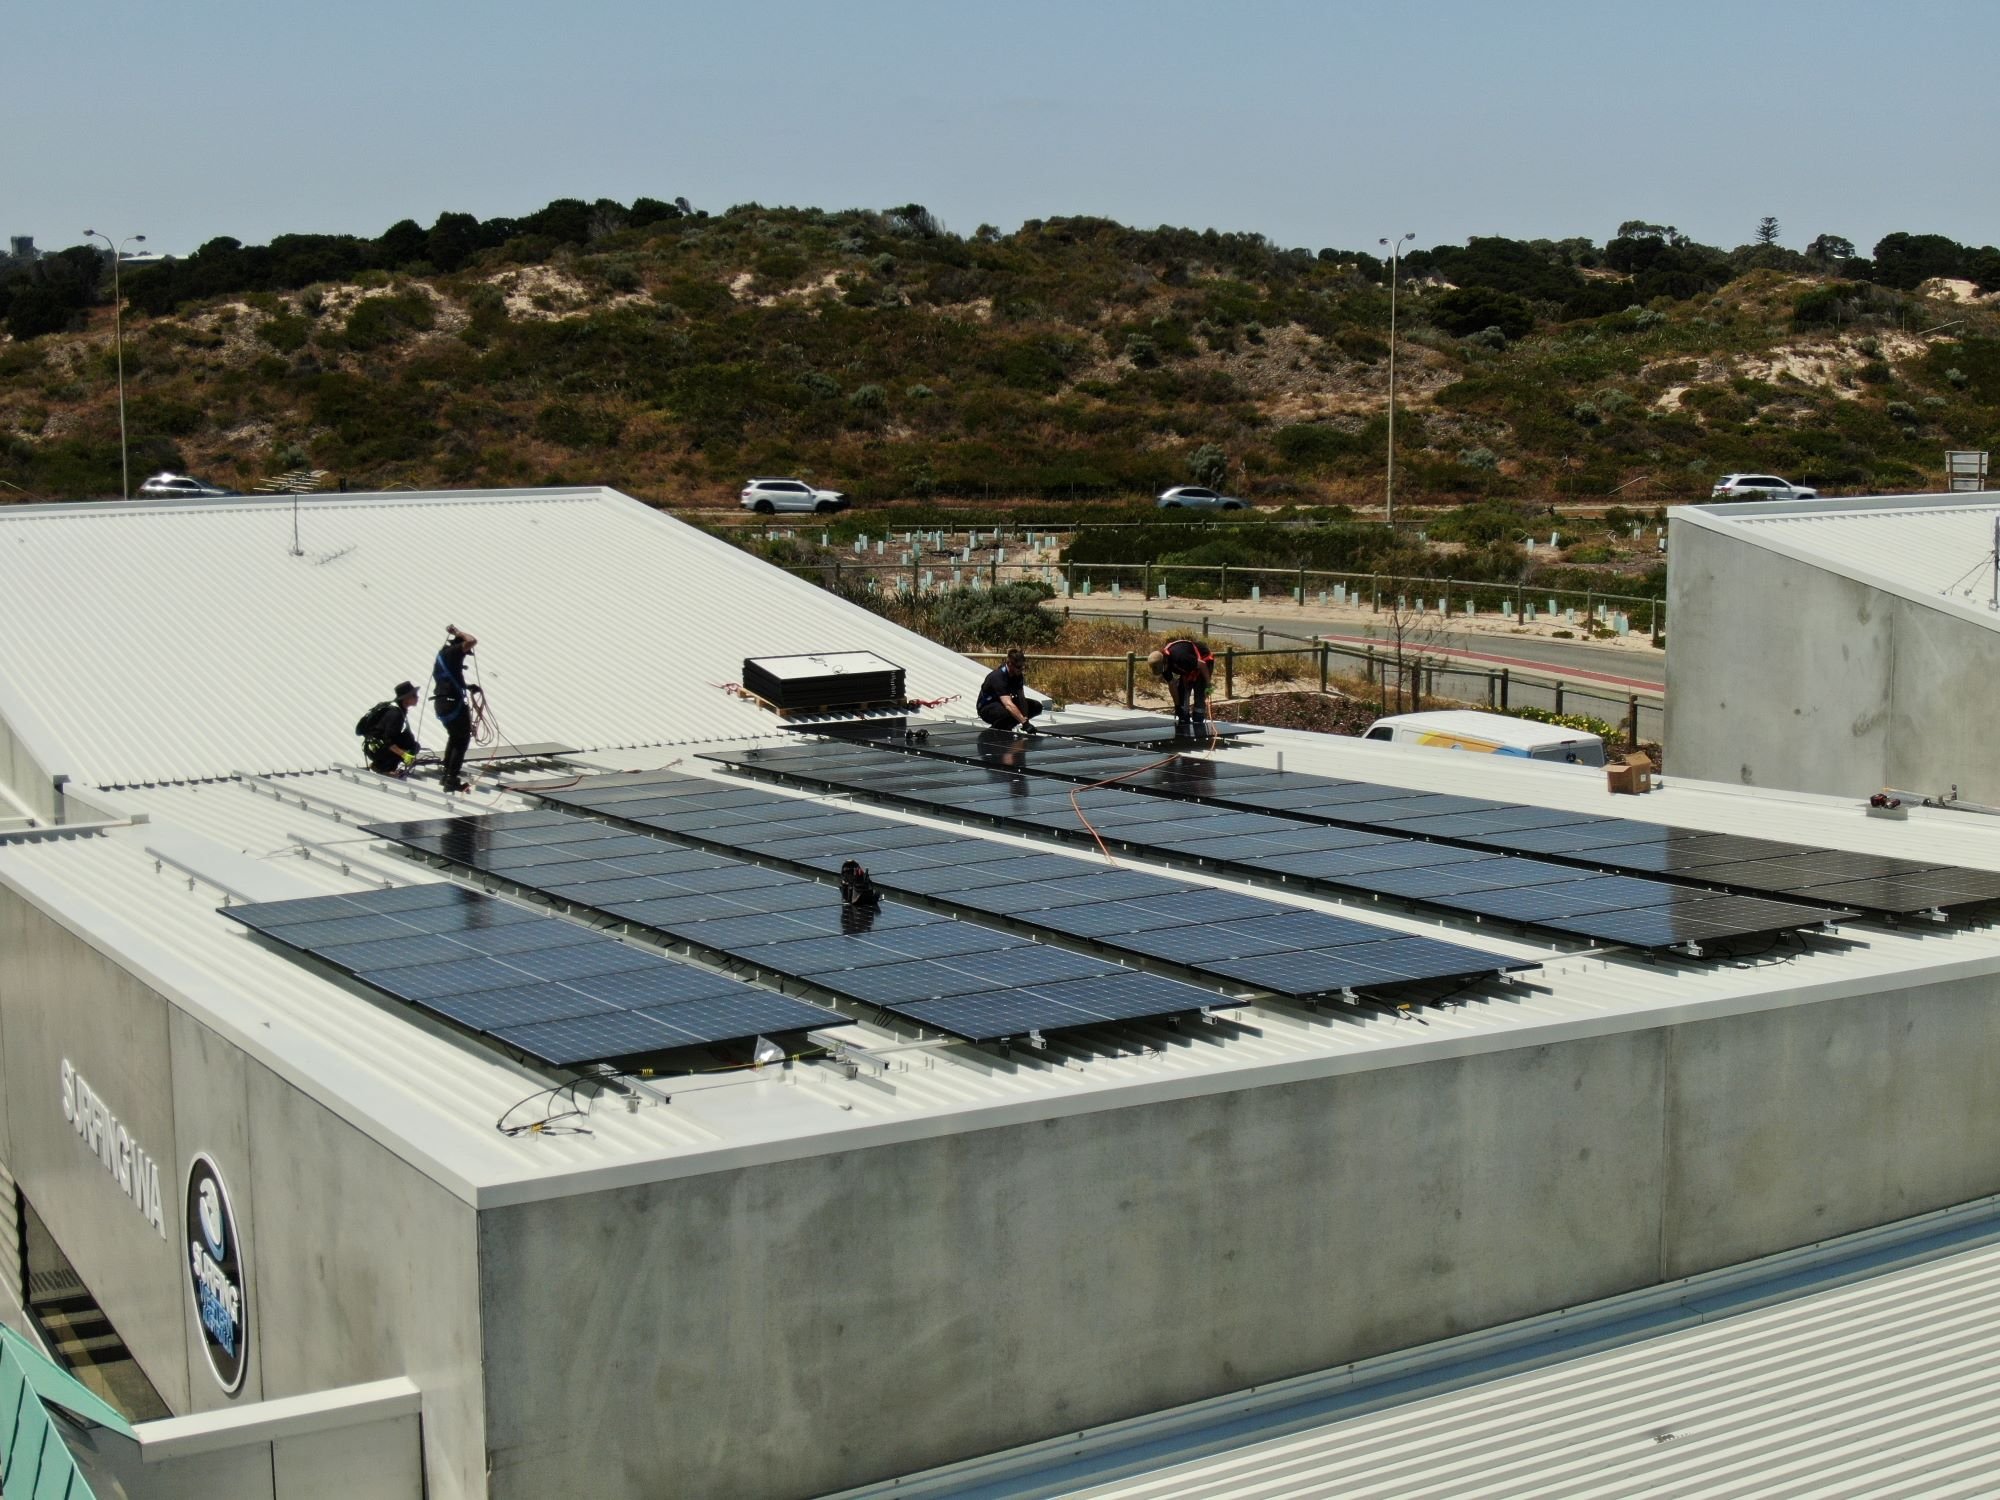 Plico staff installing solar panels on a commercial building